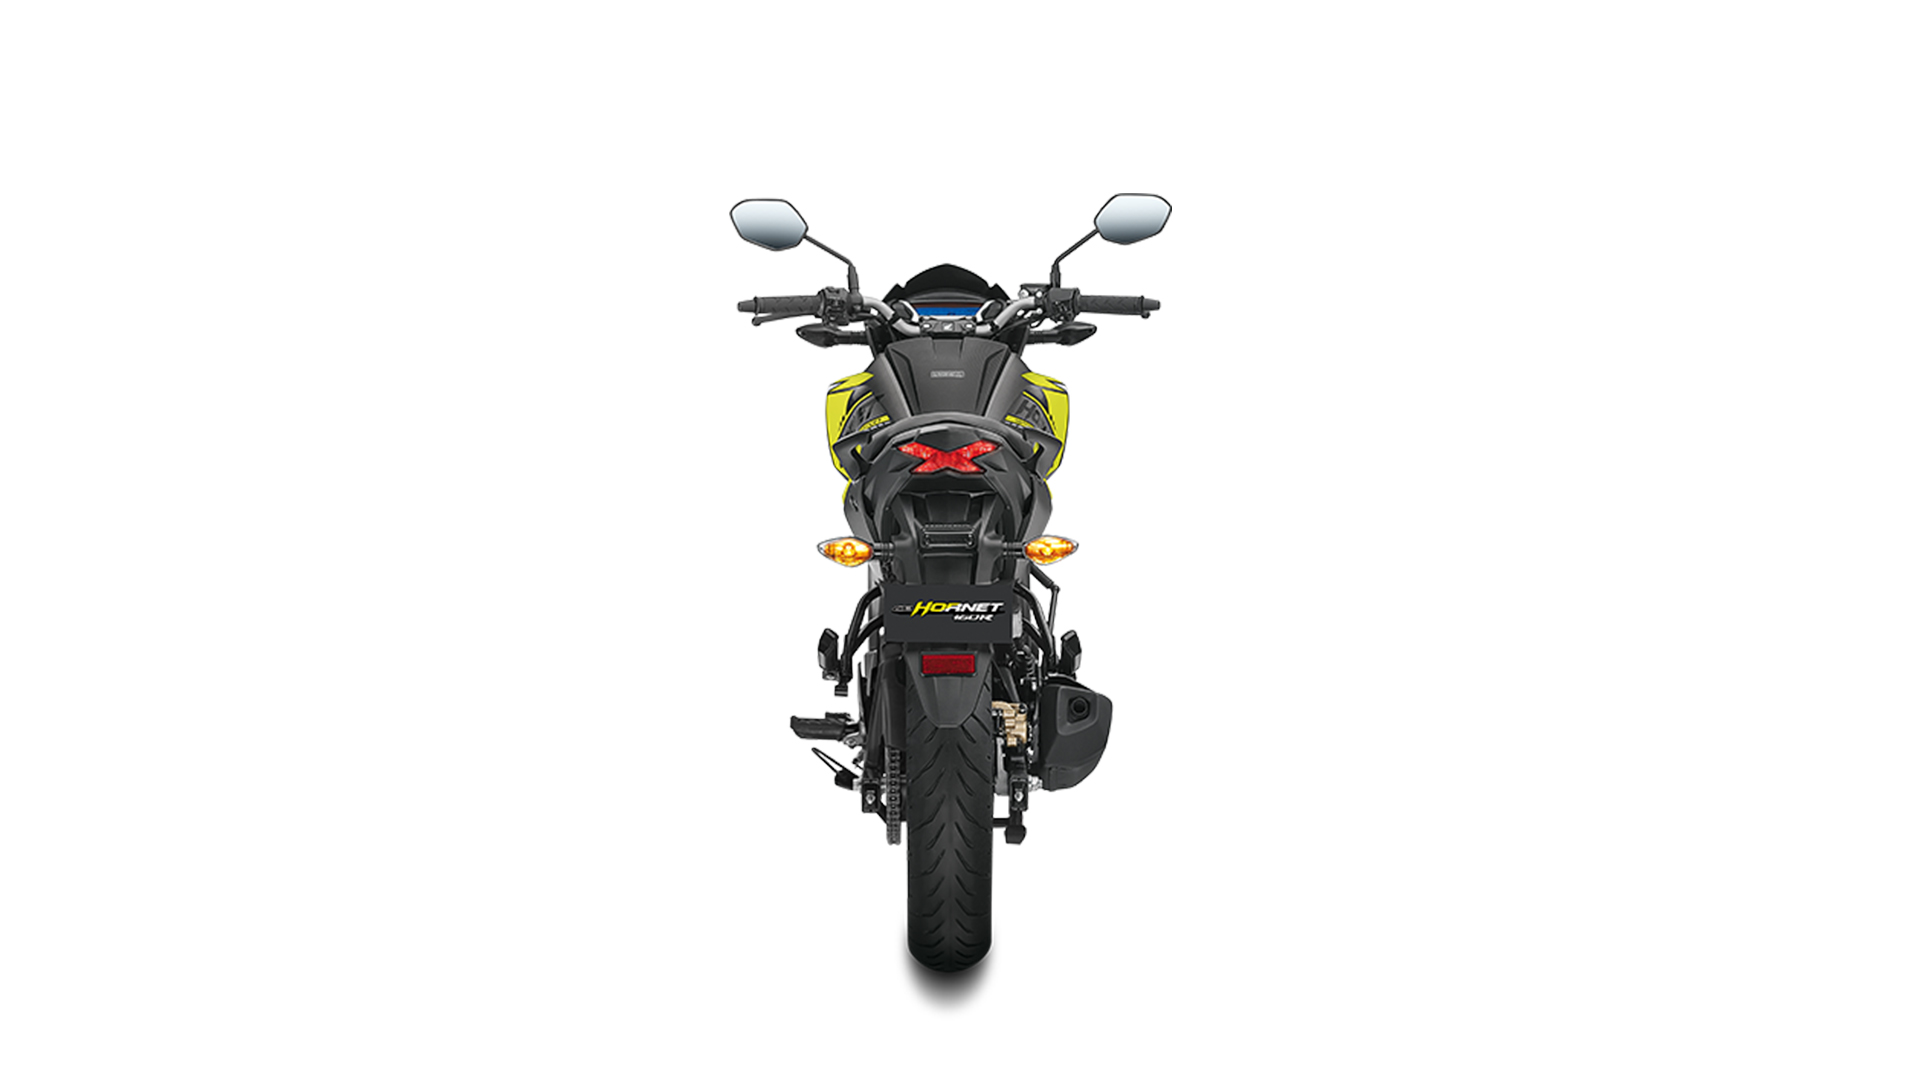 Honda Cb Hornet 160r 16 Std Price Mileage Reviews Specification Gallery Overdrive